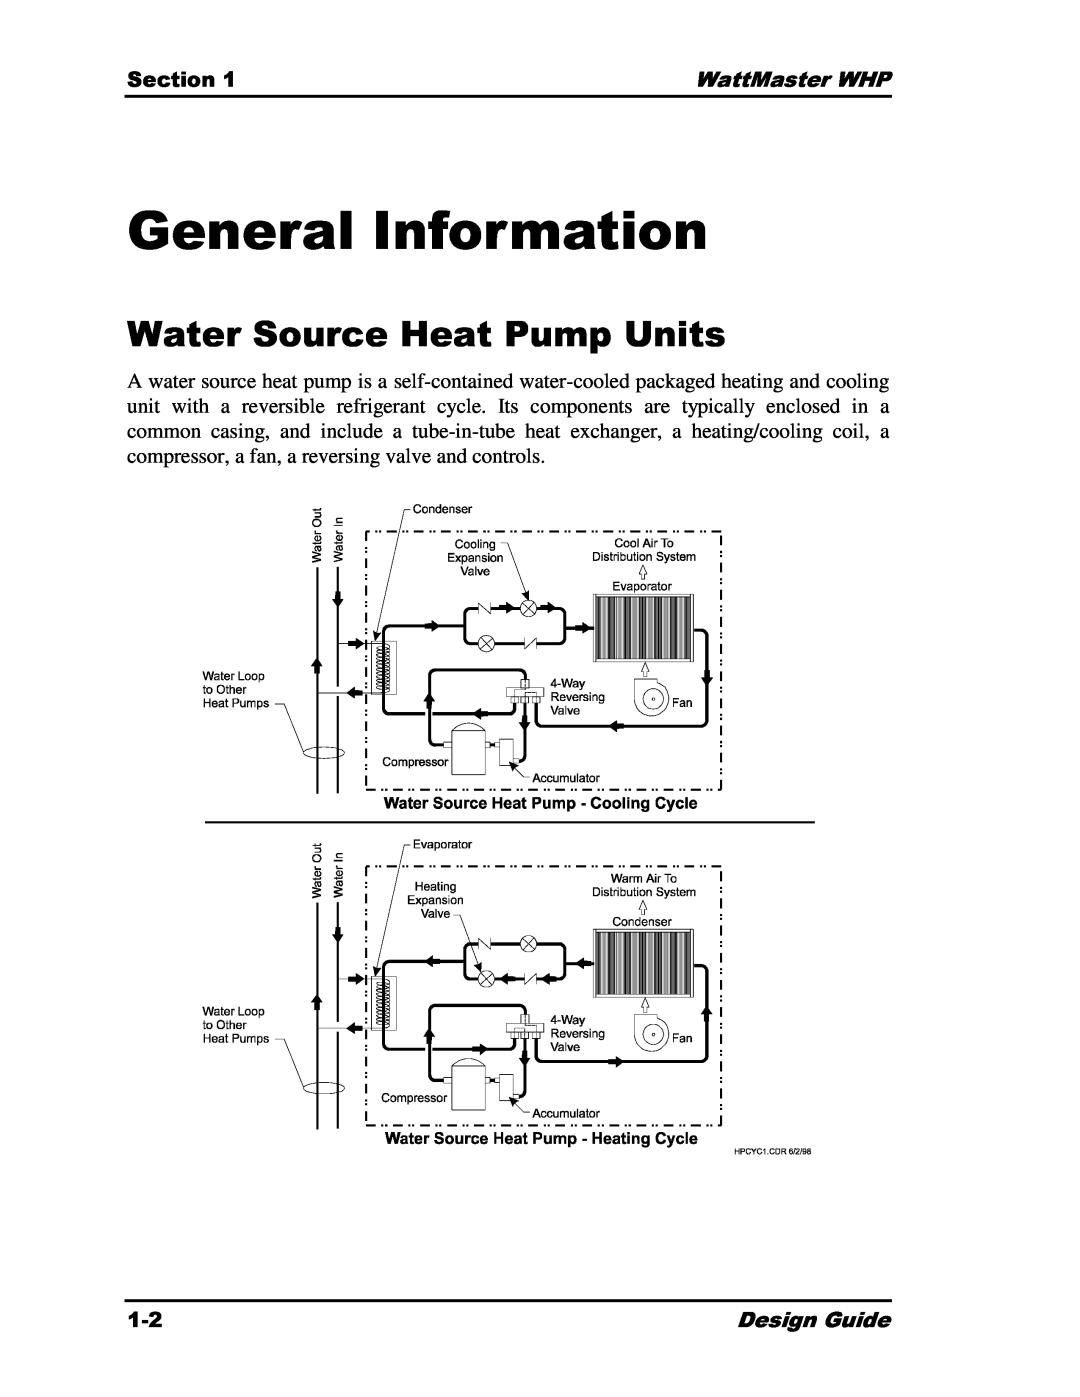 Heat Controller manual General Information, Water Source Heat Pump Units, Section, WattMaster WHP, Design Guide 